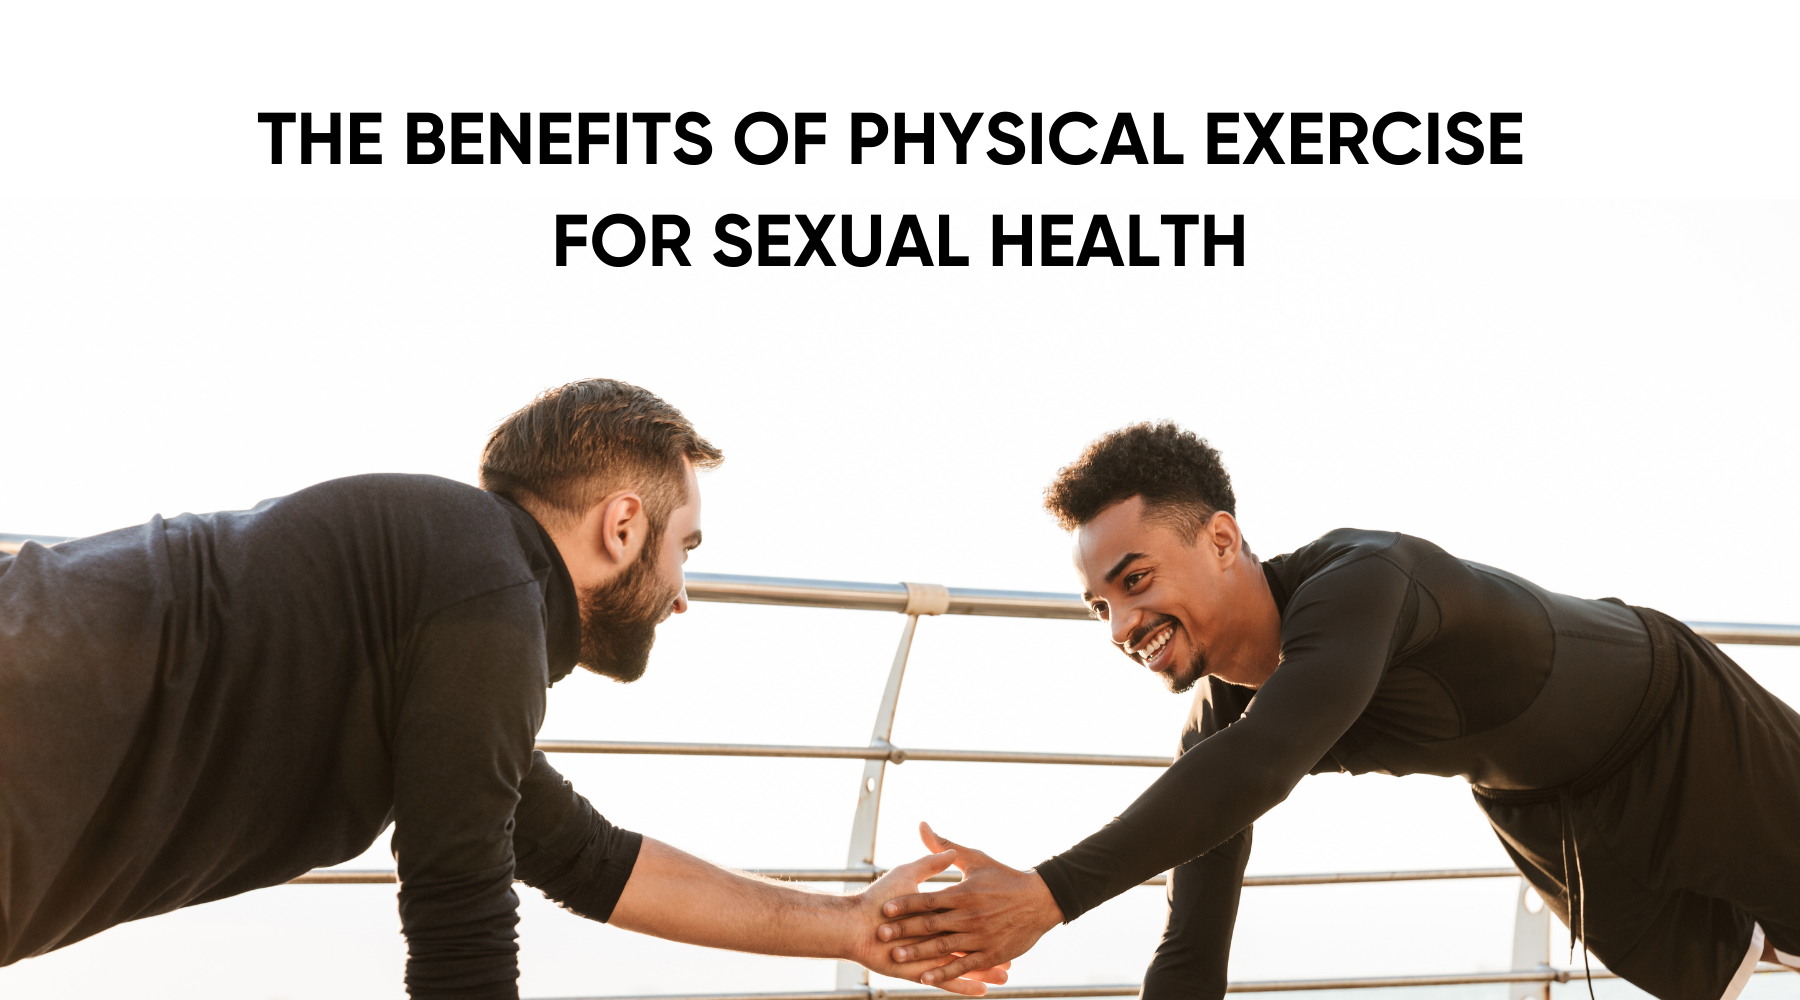 THE BENEFITS OF PHYSICAL EXERCISE FOR SEXUAL HEALTH